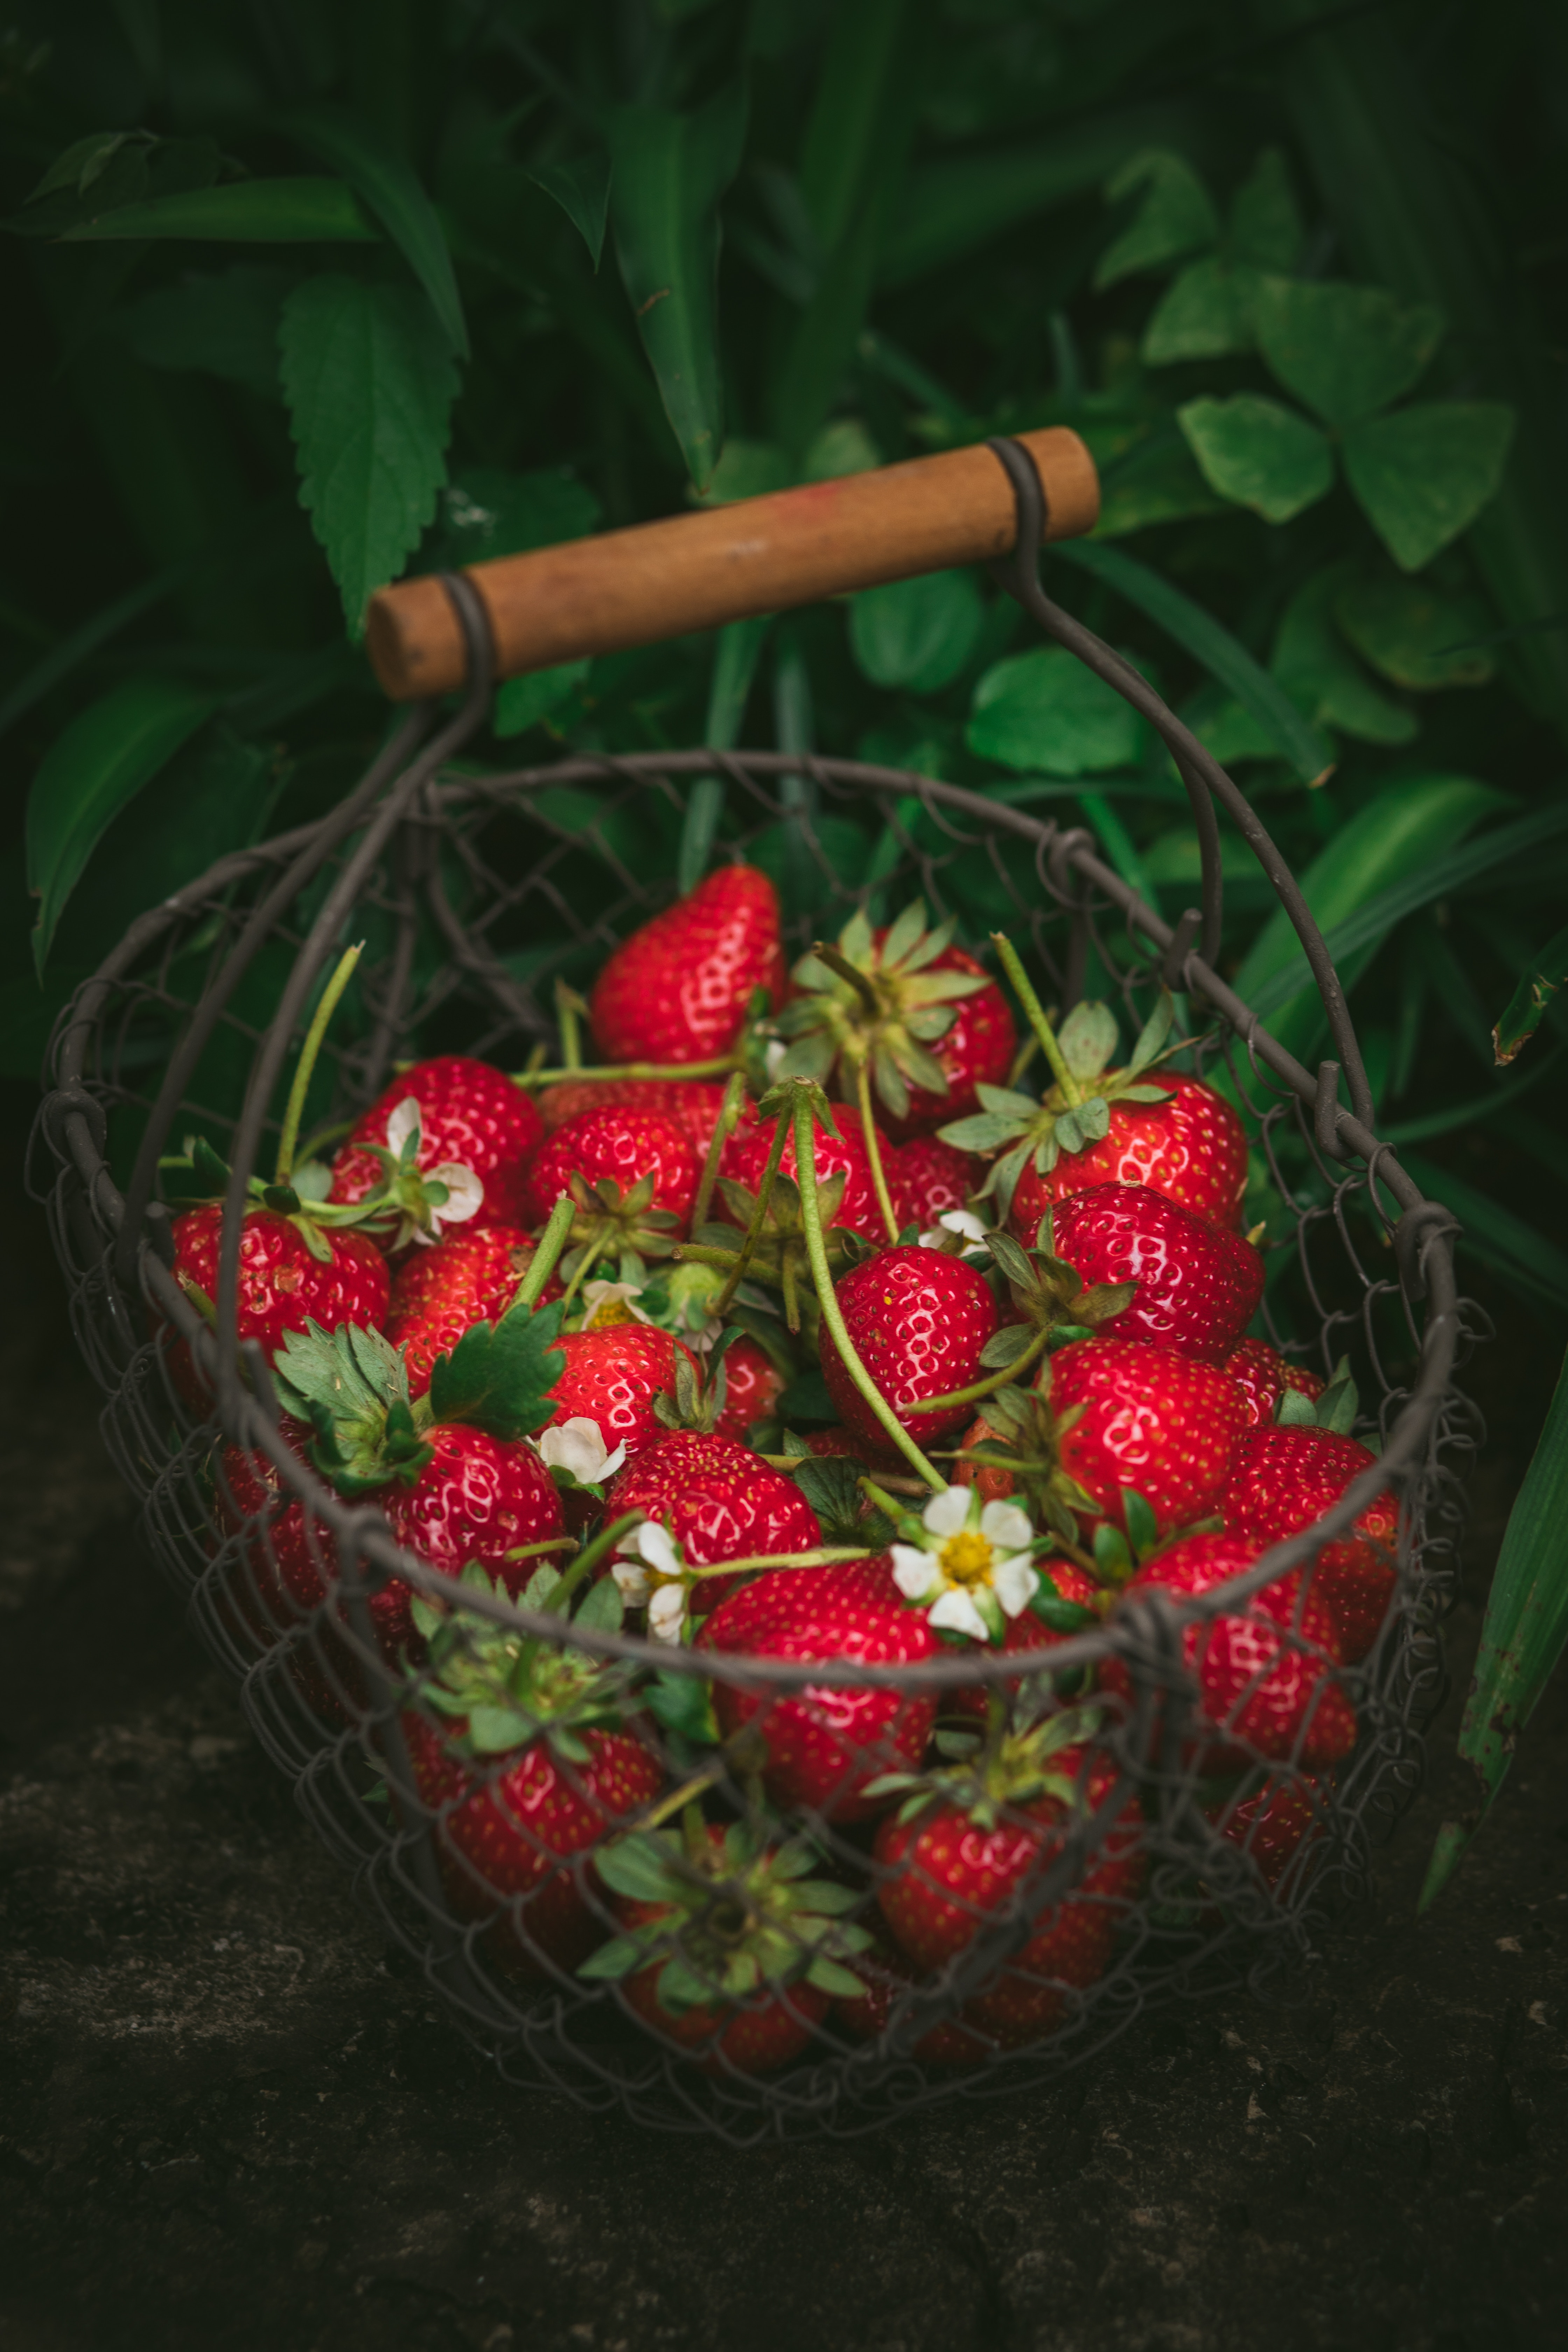 strawberry, berries, fresh, food, red, basket, ripe High Definition image